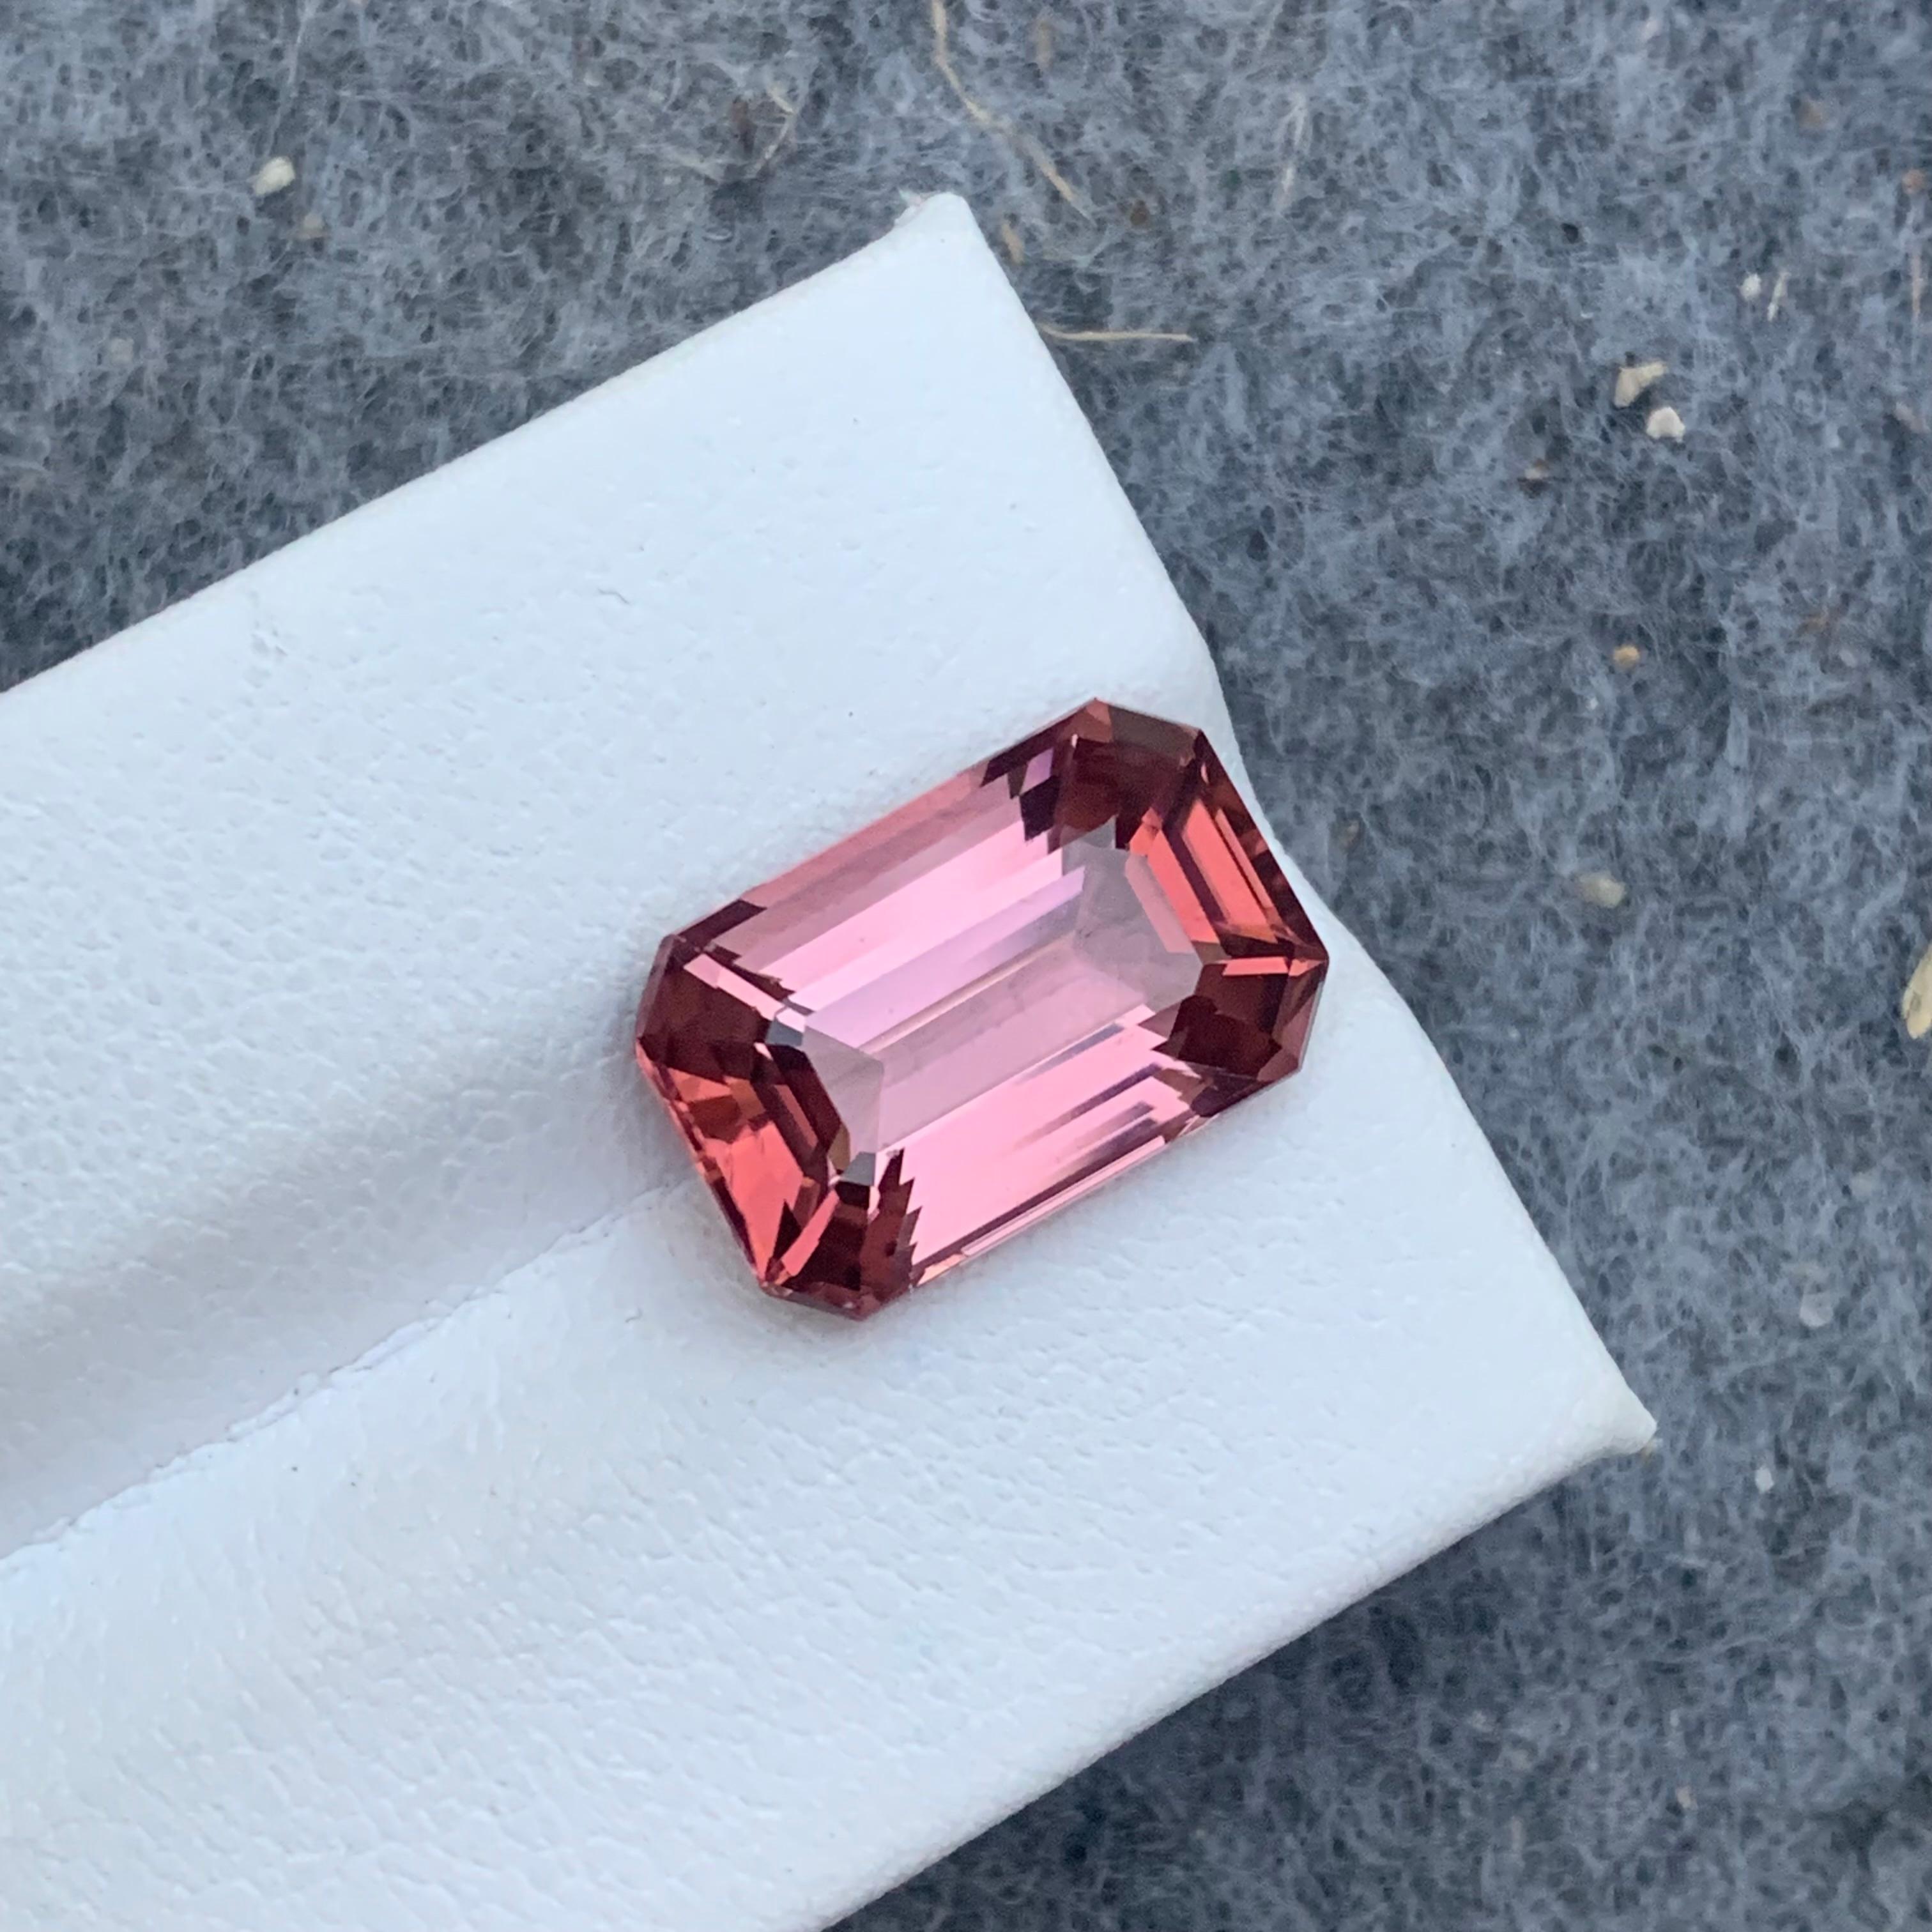 9.0 Carat AAA Quality Loose Soft Pink Tourmaline Emerald Cut From Afghanistan 3